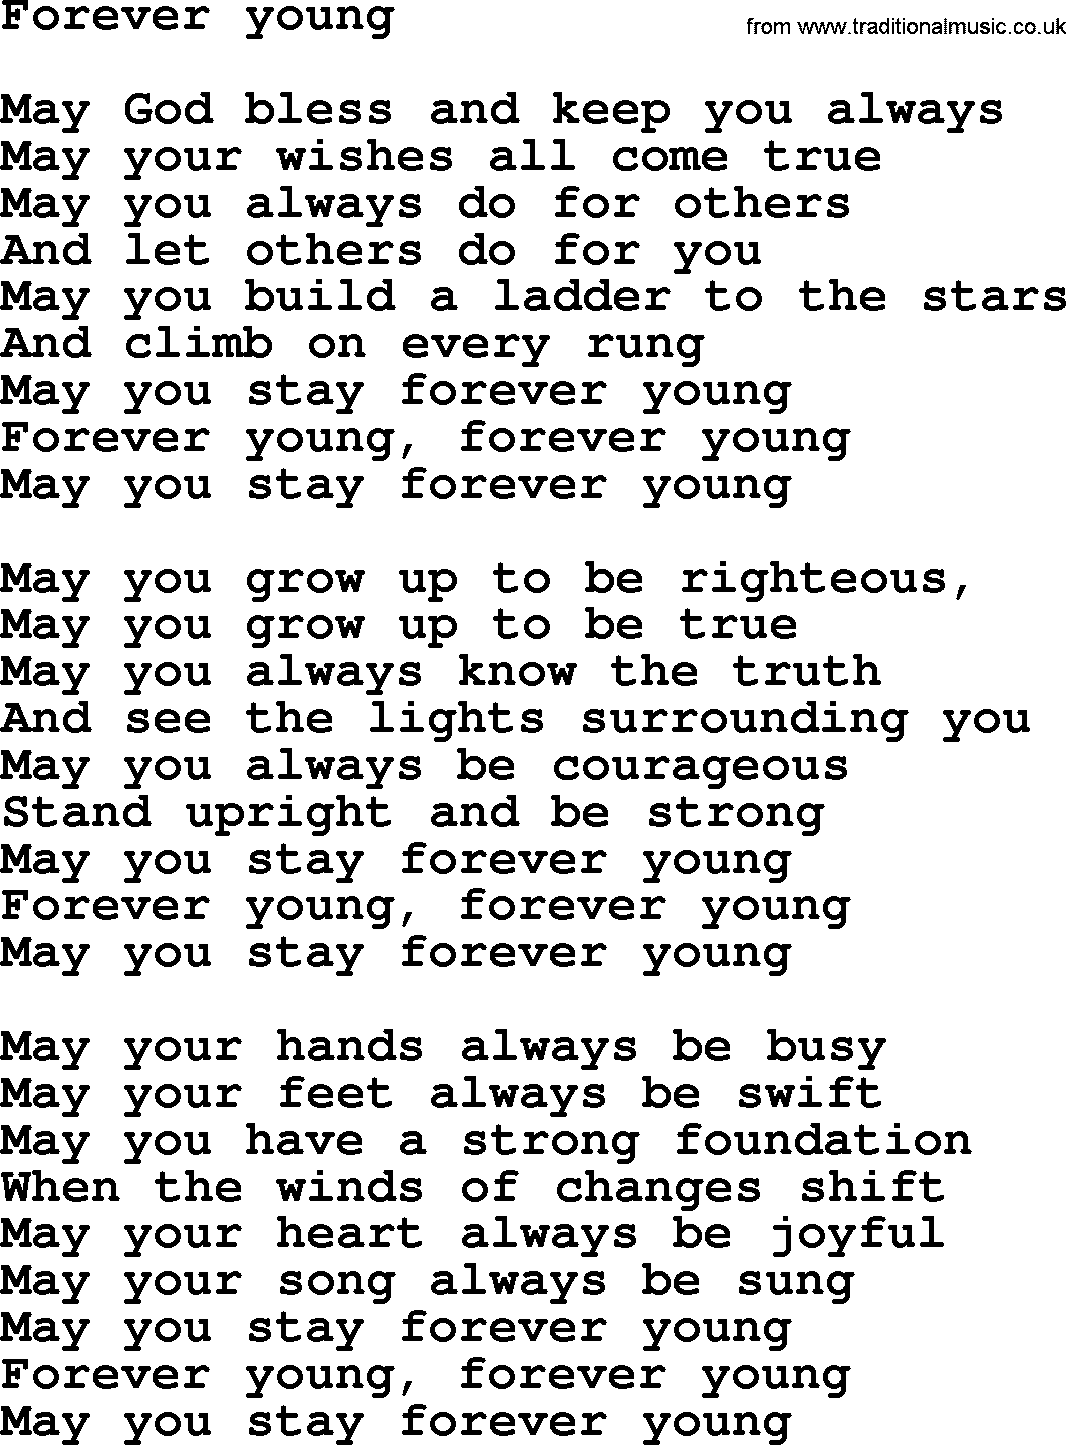 Bruce Springsteen song: Forever Young lyrics